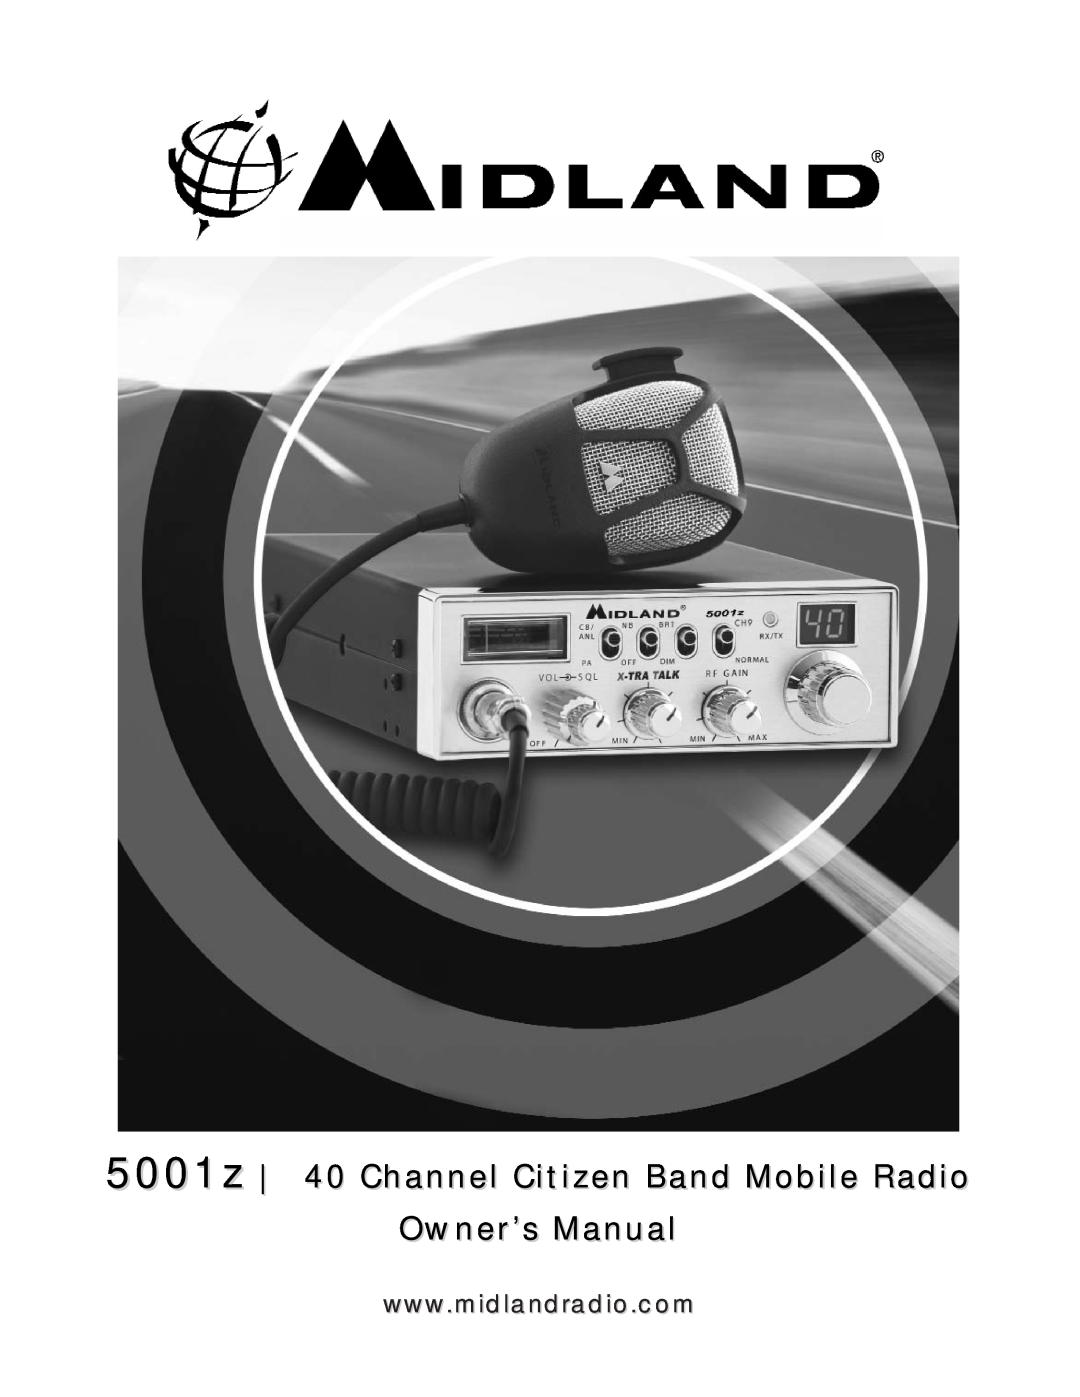 Midland Radio owner manual 5001z 40 Channel Citizen Band Mobile Radio 